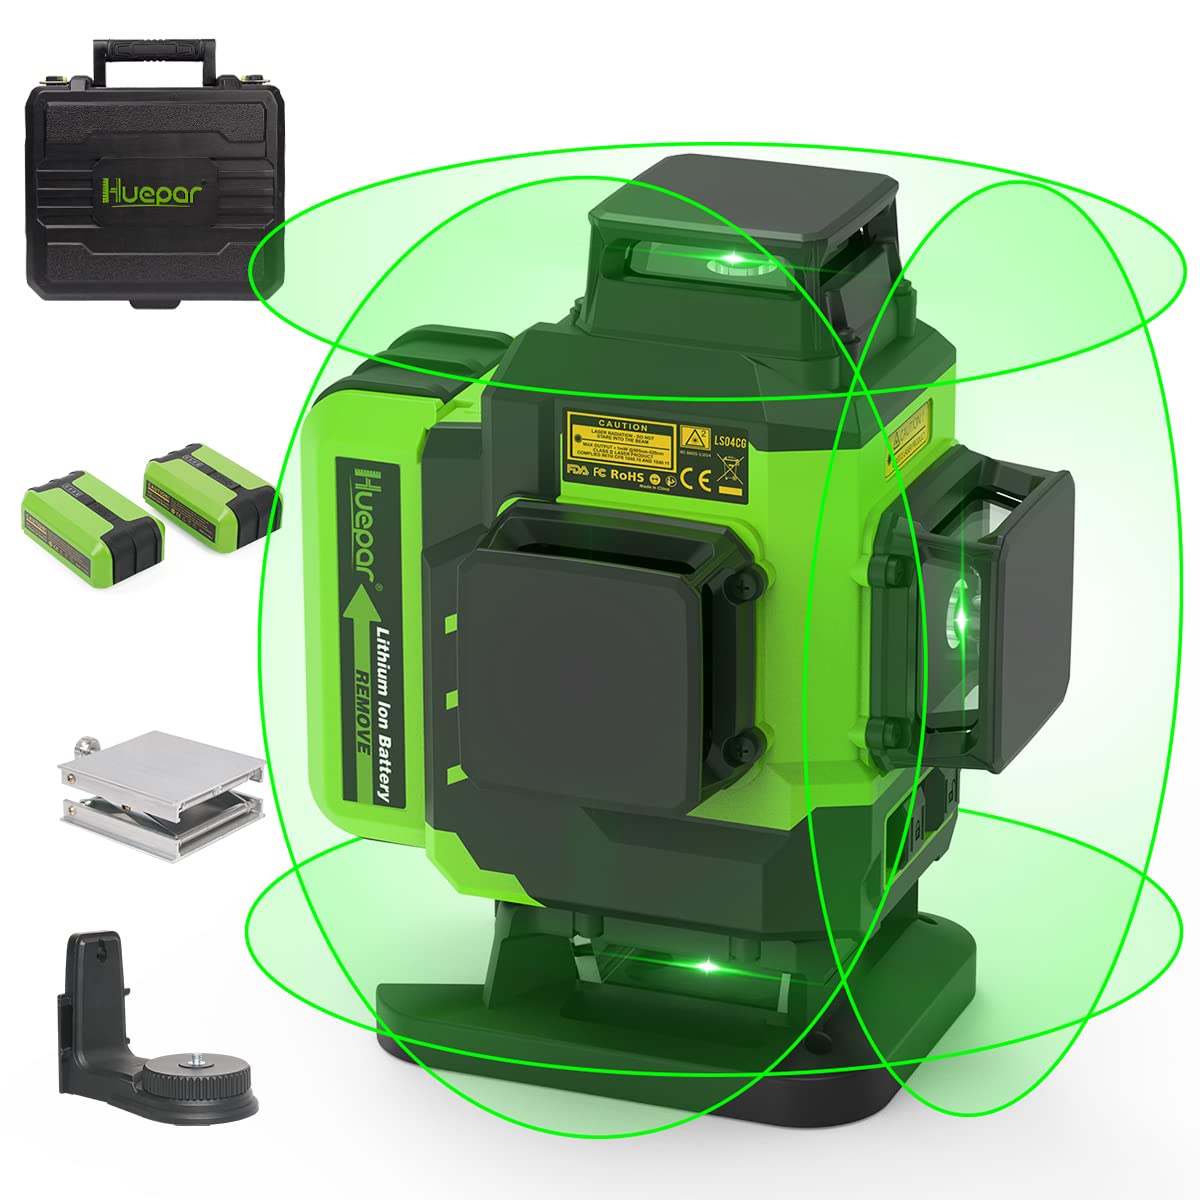 Huepar Multi-Line Laser Level-Four Vertical and One 360° Horizontal Lines with Plumb Dot, Green Cross Line Self-leveling Laser Tool -Rotating Base, Lifting Base, 2 Li-ion Battery&Hard Carry Case LS41G